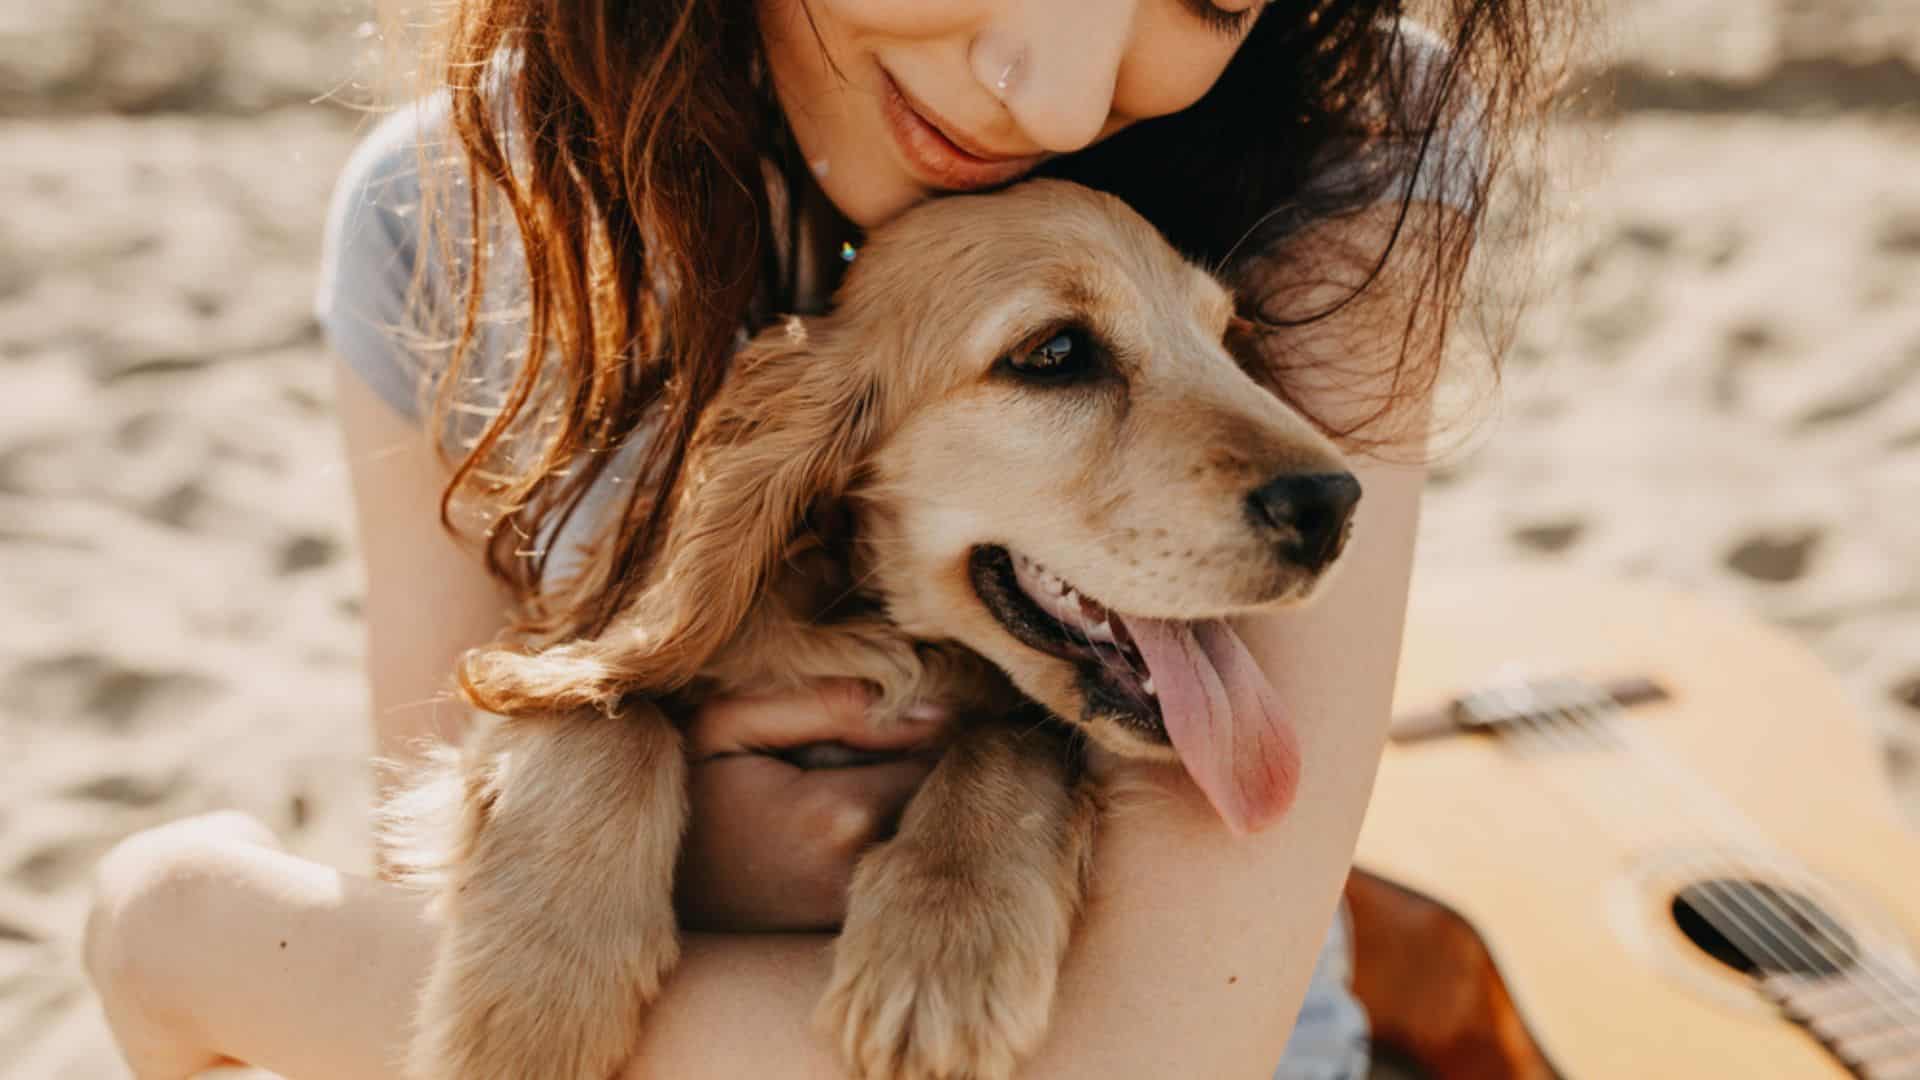 10 Ways To Say “I Love You” To Your Dog 